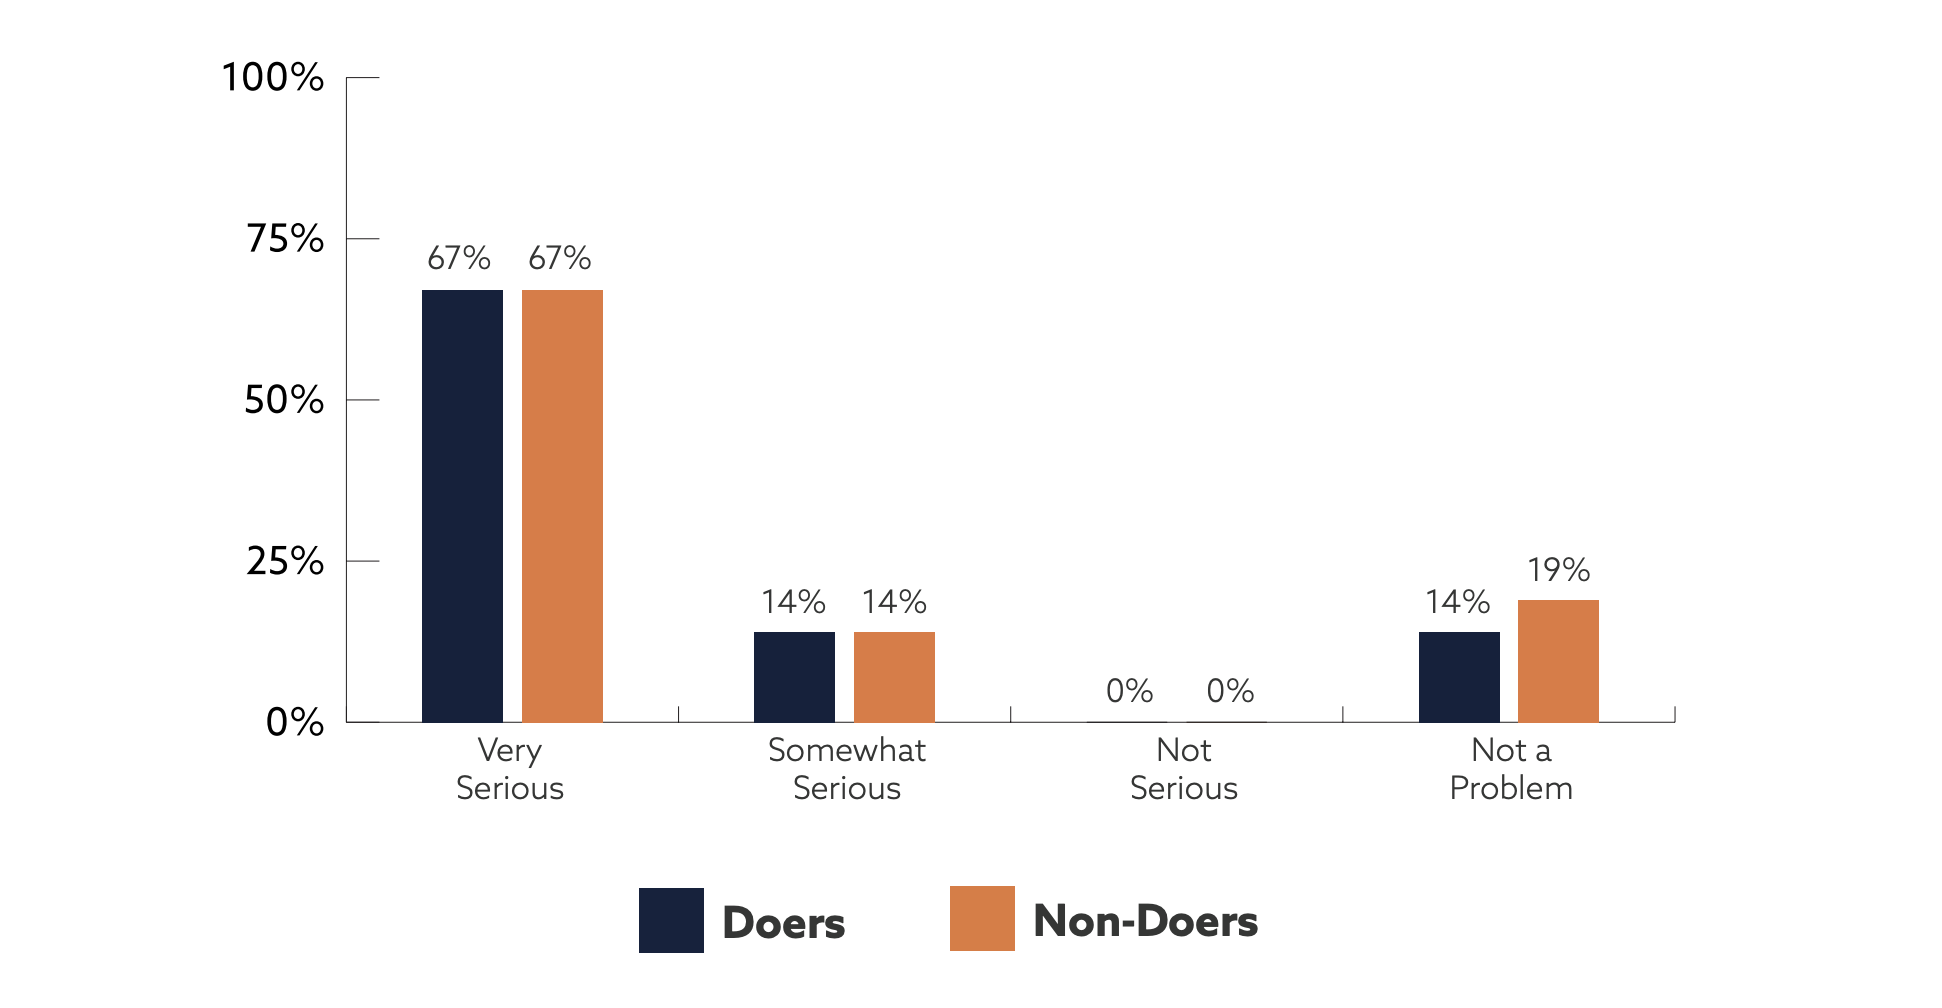 Bar chart.  Doers: Very serious 67%; Somewhat serious 14%; Not serious 0%; Not a problem 14%.  Non-Doers: Very serious 67%; Somewhat serious 14%; Not serious 0%; Not a problem 19%